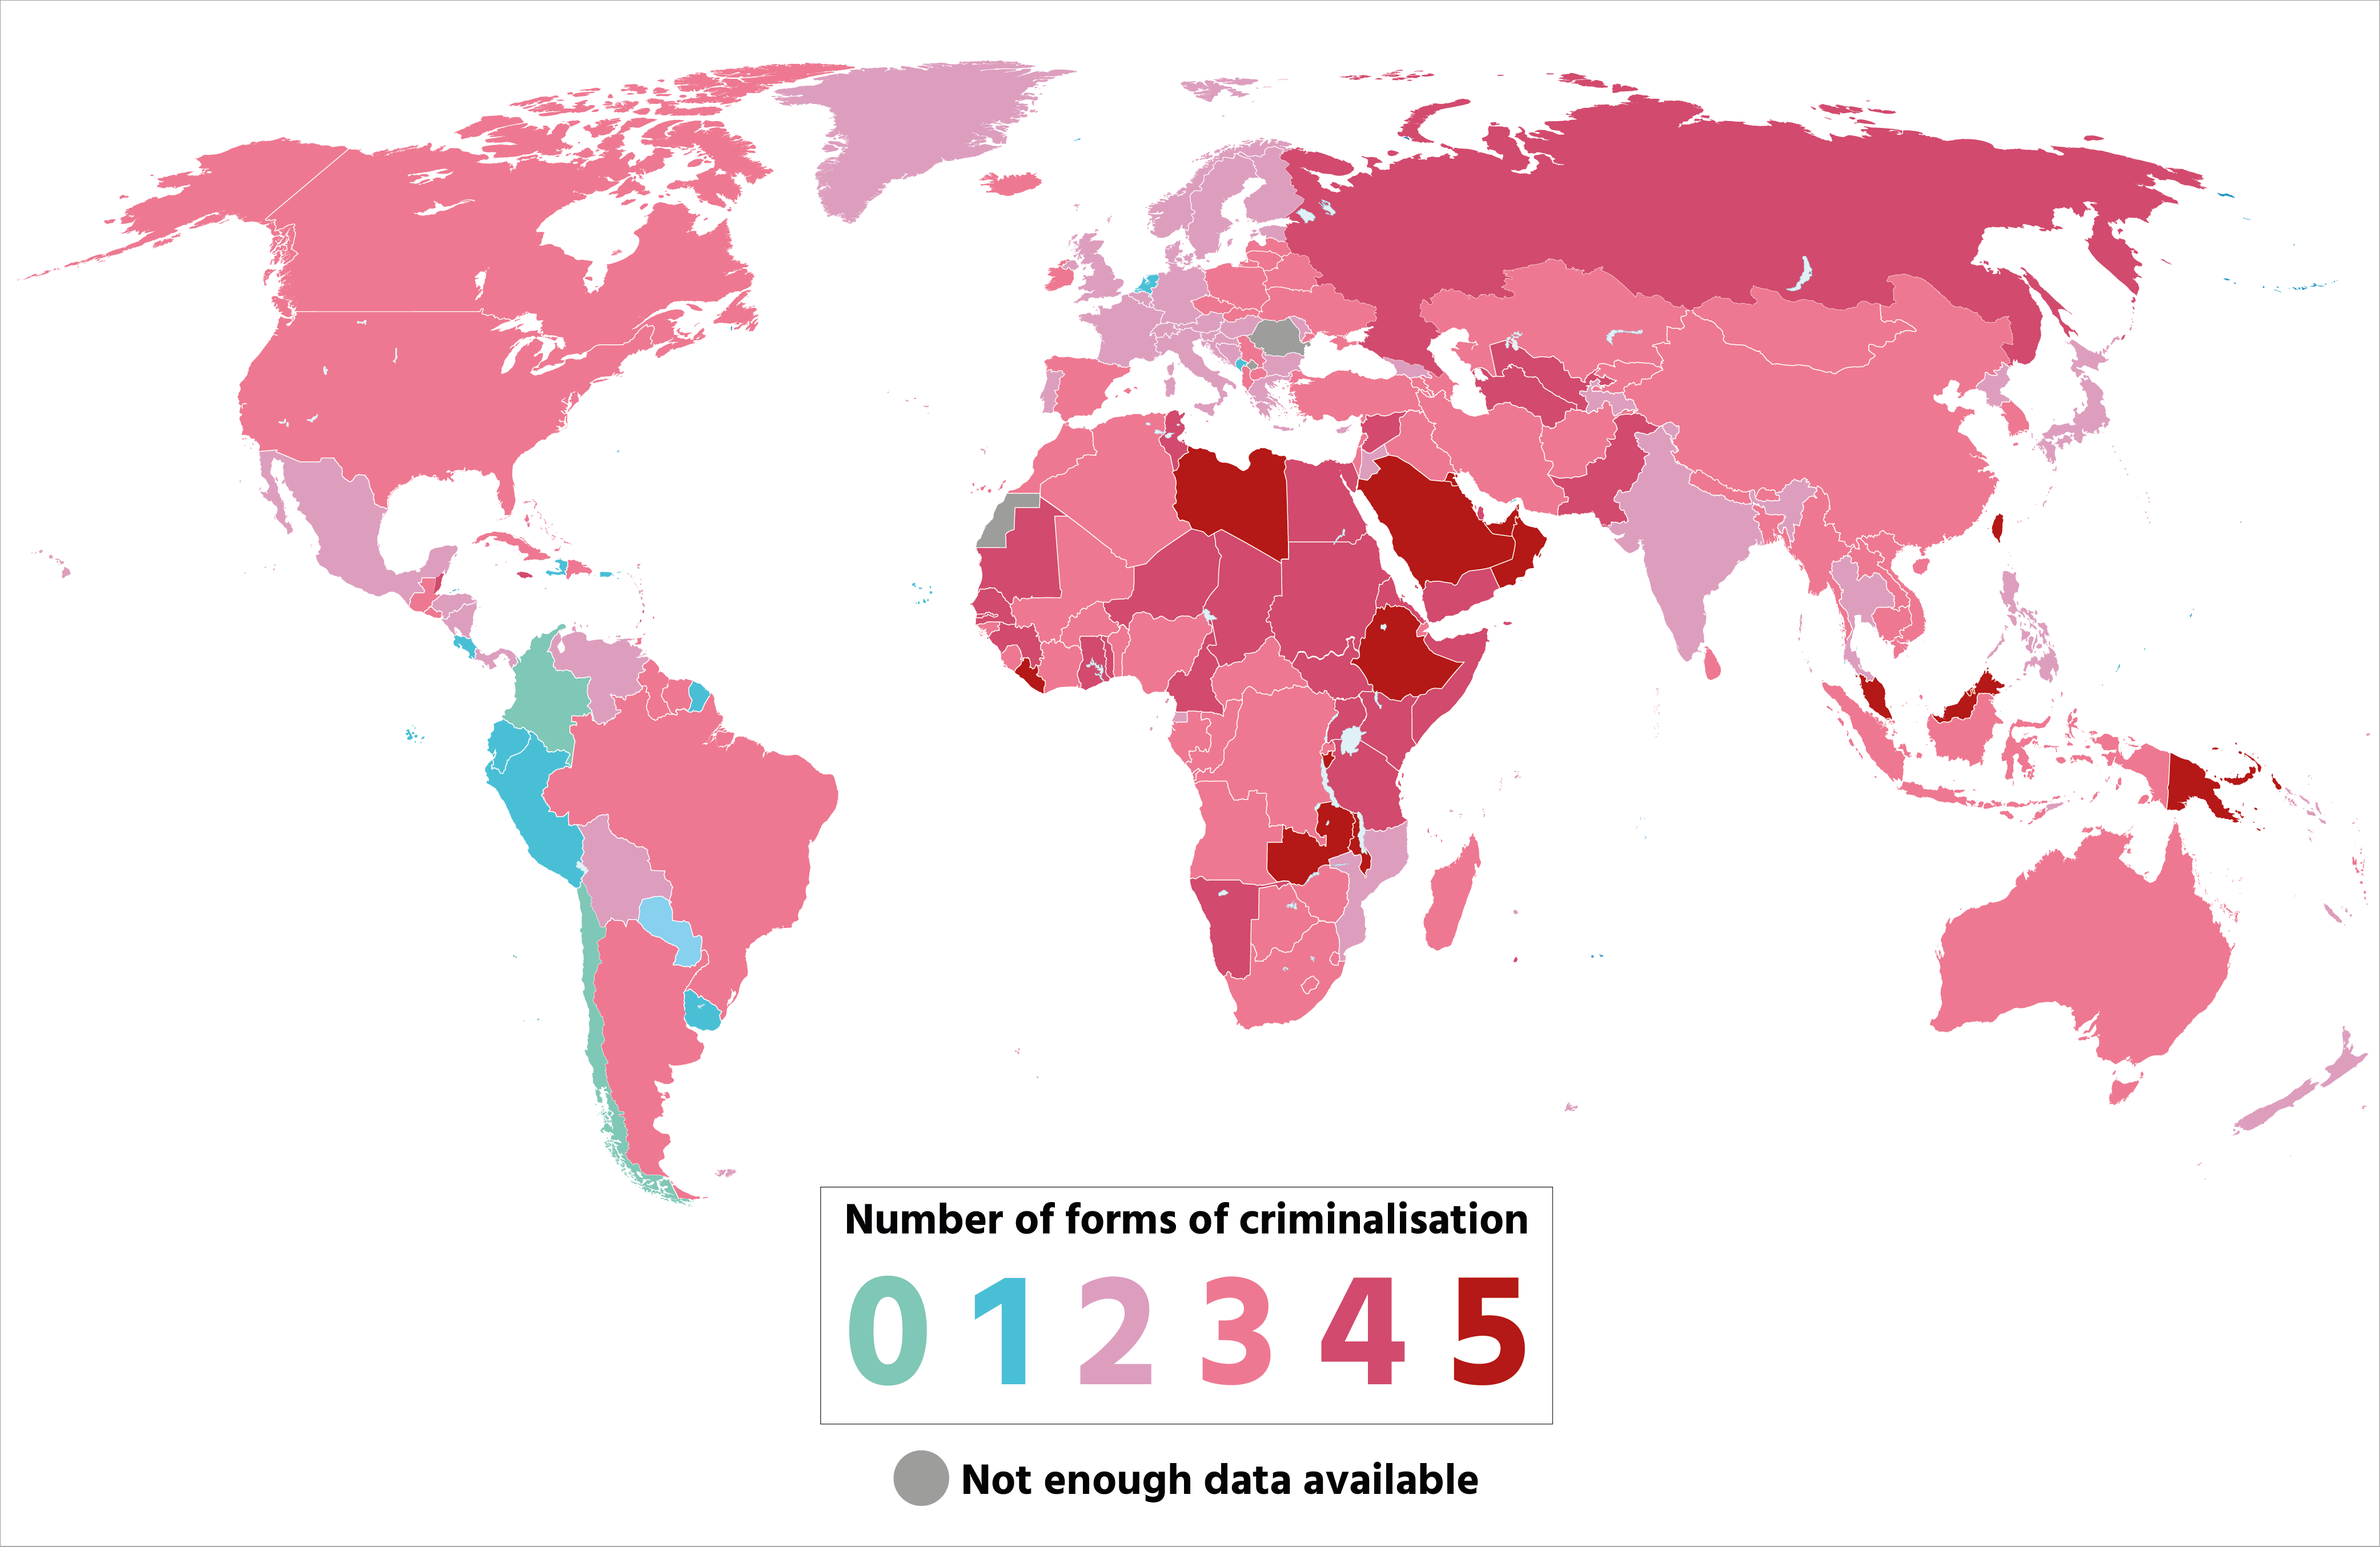 Many countries still partially or fully criminalise HIV transmission or exposure, same-sex relationships, drug use and/or sex work. The map shows how many of these behaviours are either fully or partially criminalised and/or have a history of being prosecuted. Data sources: UNAIDS, Georgetown University.